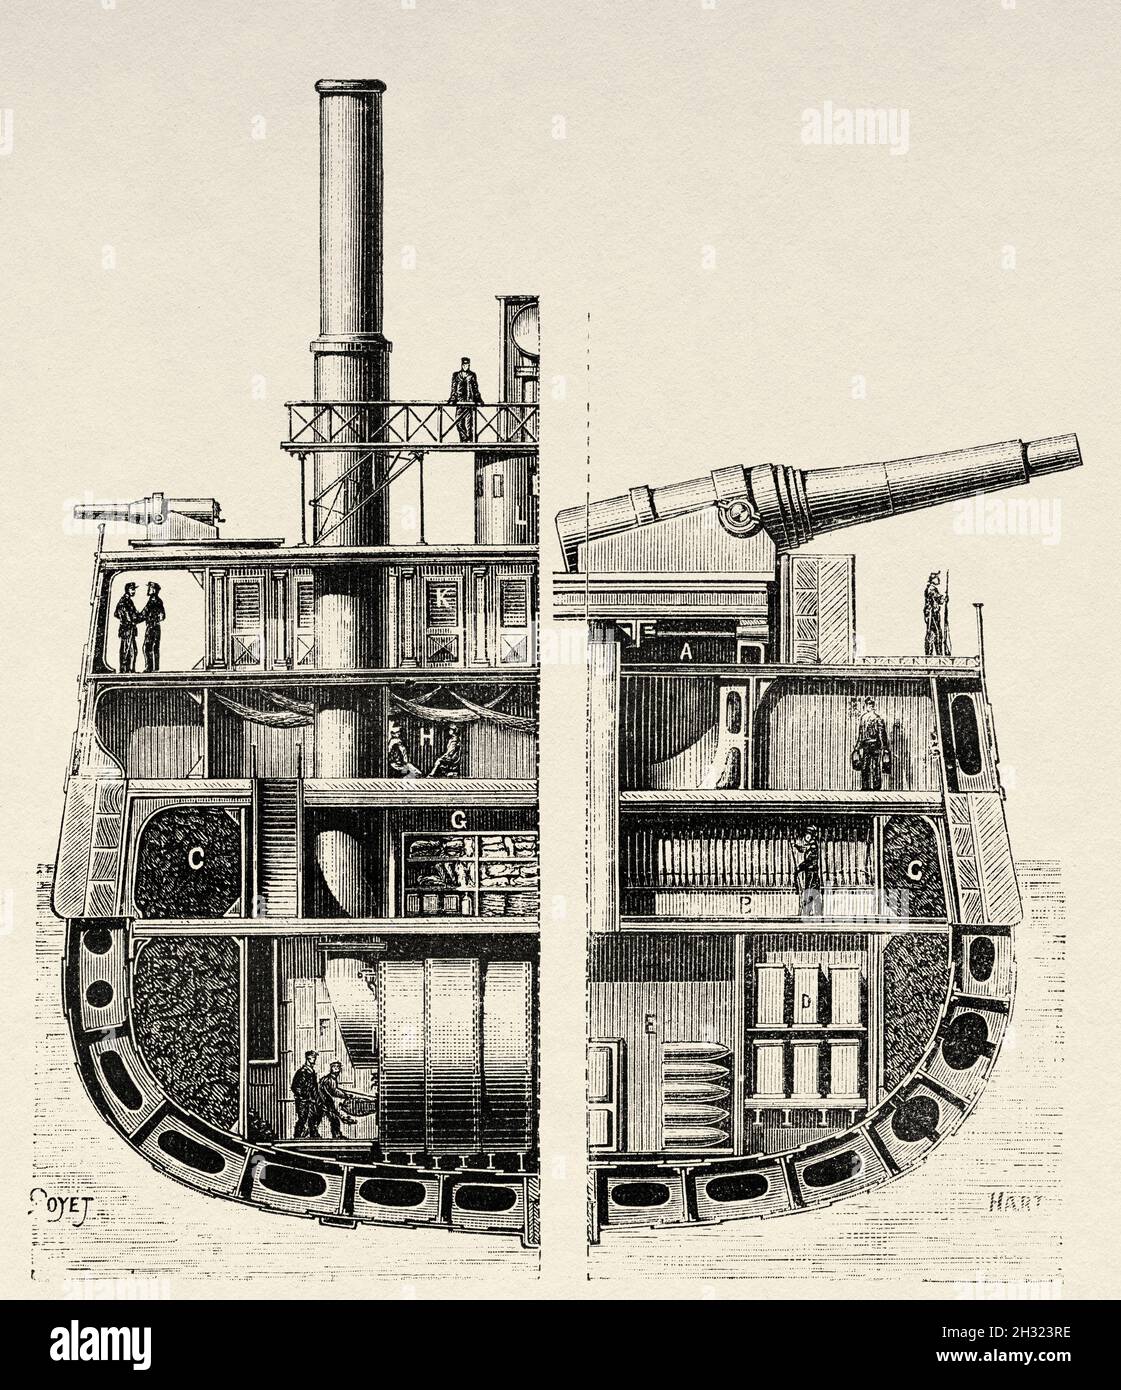 French ironclad Indomptable was an ironclad barbette ship built for the French Navy in the late 1870s and early 1880s. The main armament consisted of two 420 mm guns, France. Europe. Old 19th century engraved illustration from La Nature 1883 Stock Photo